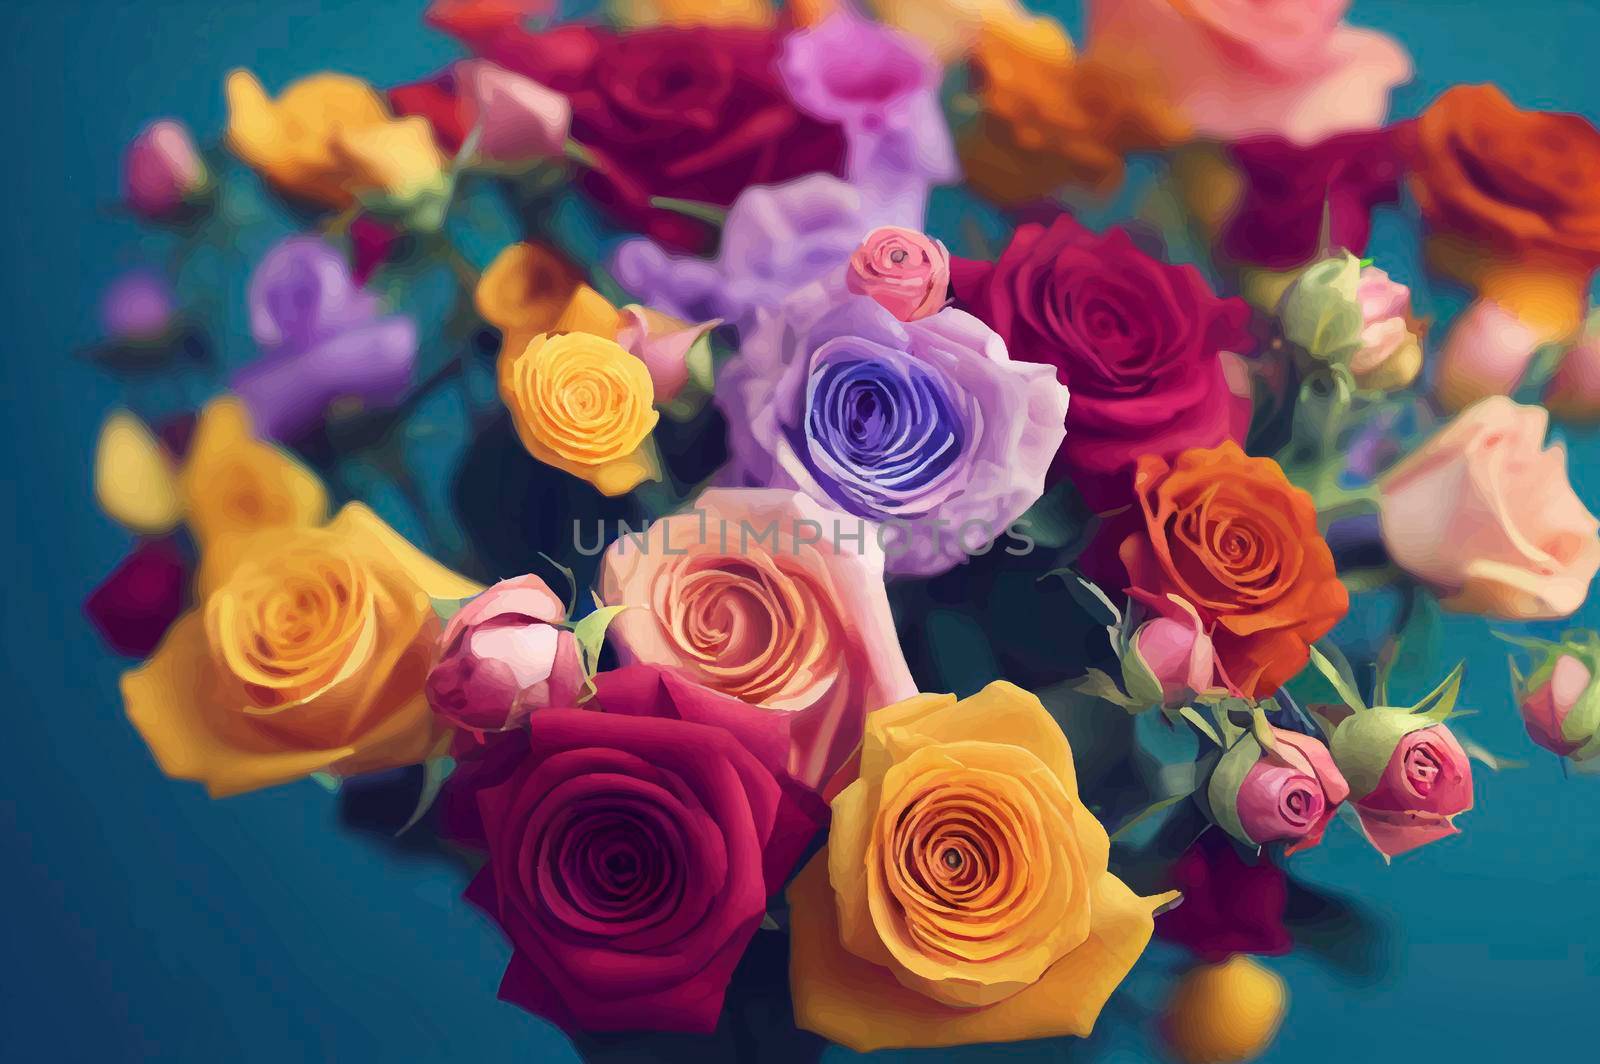 illustration of beautiful colorful roses, colorful roses background.